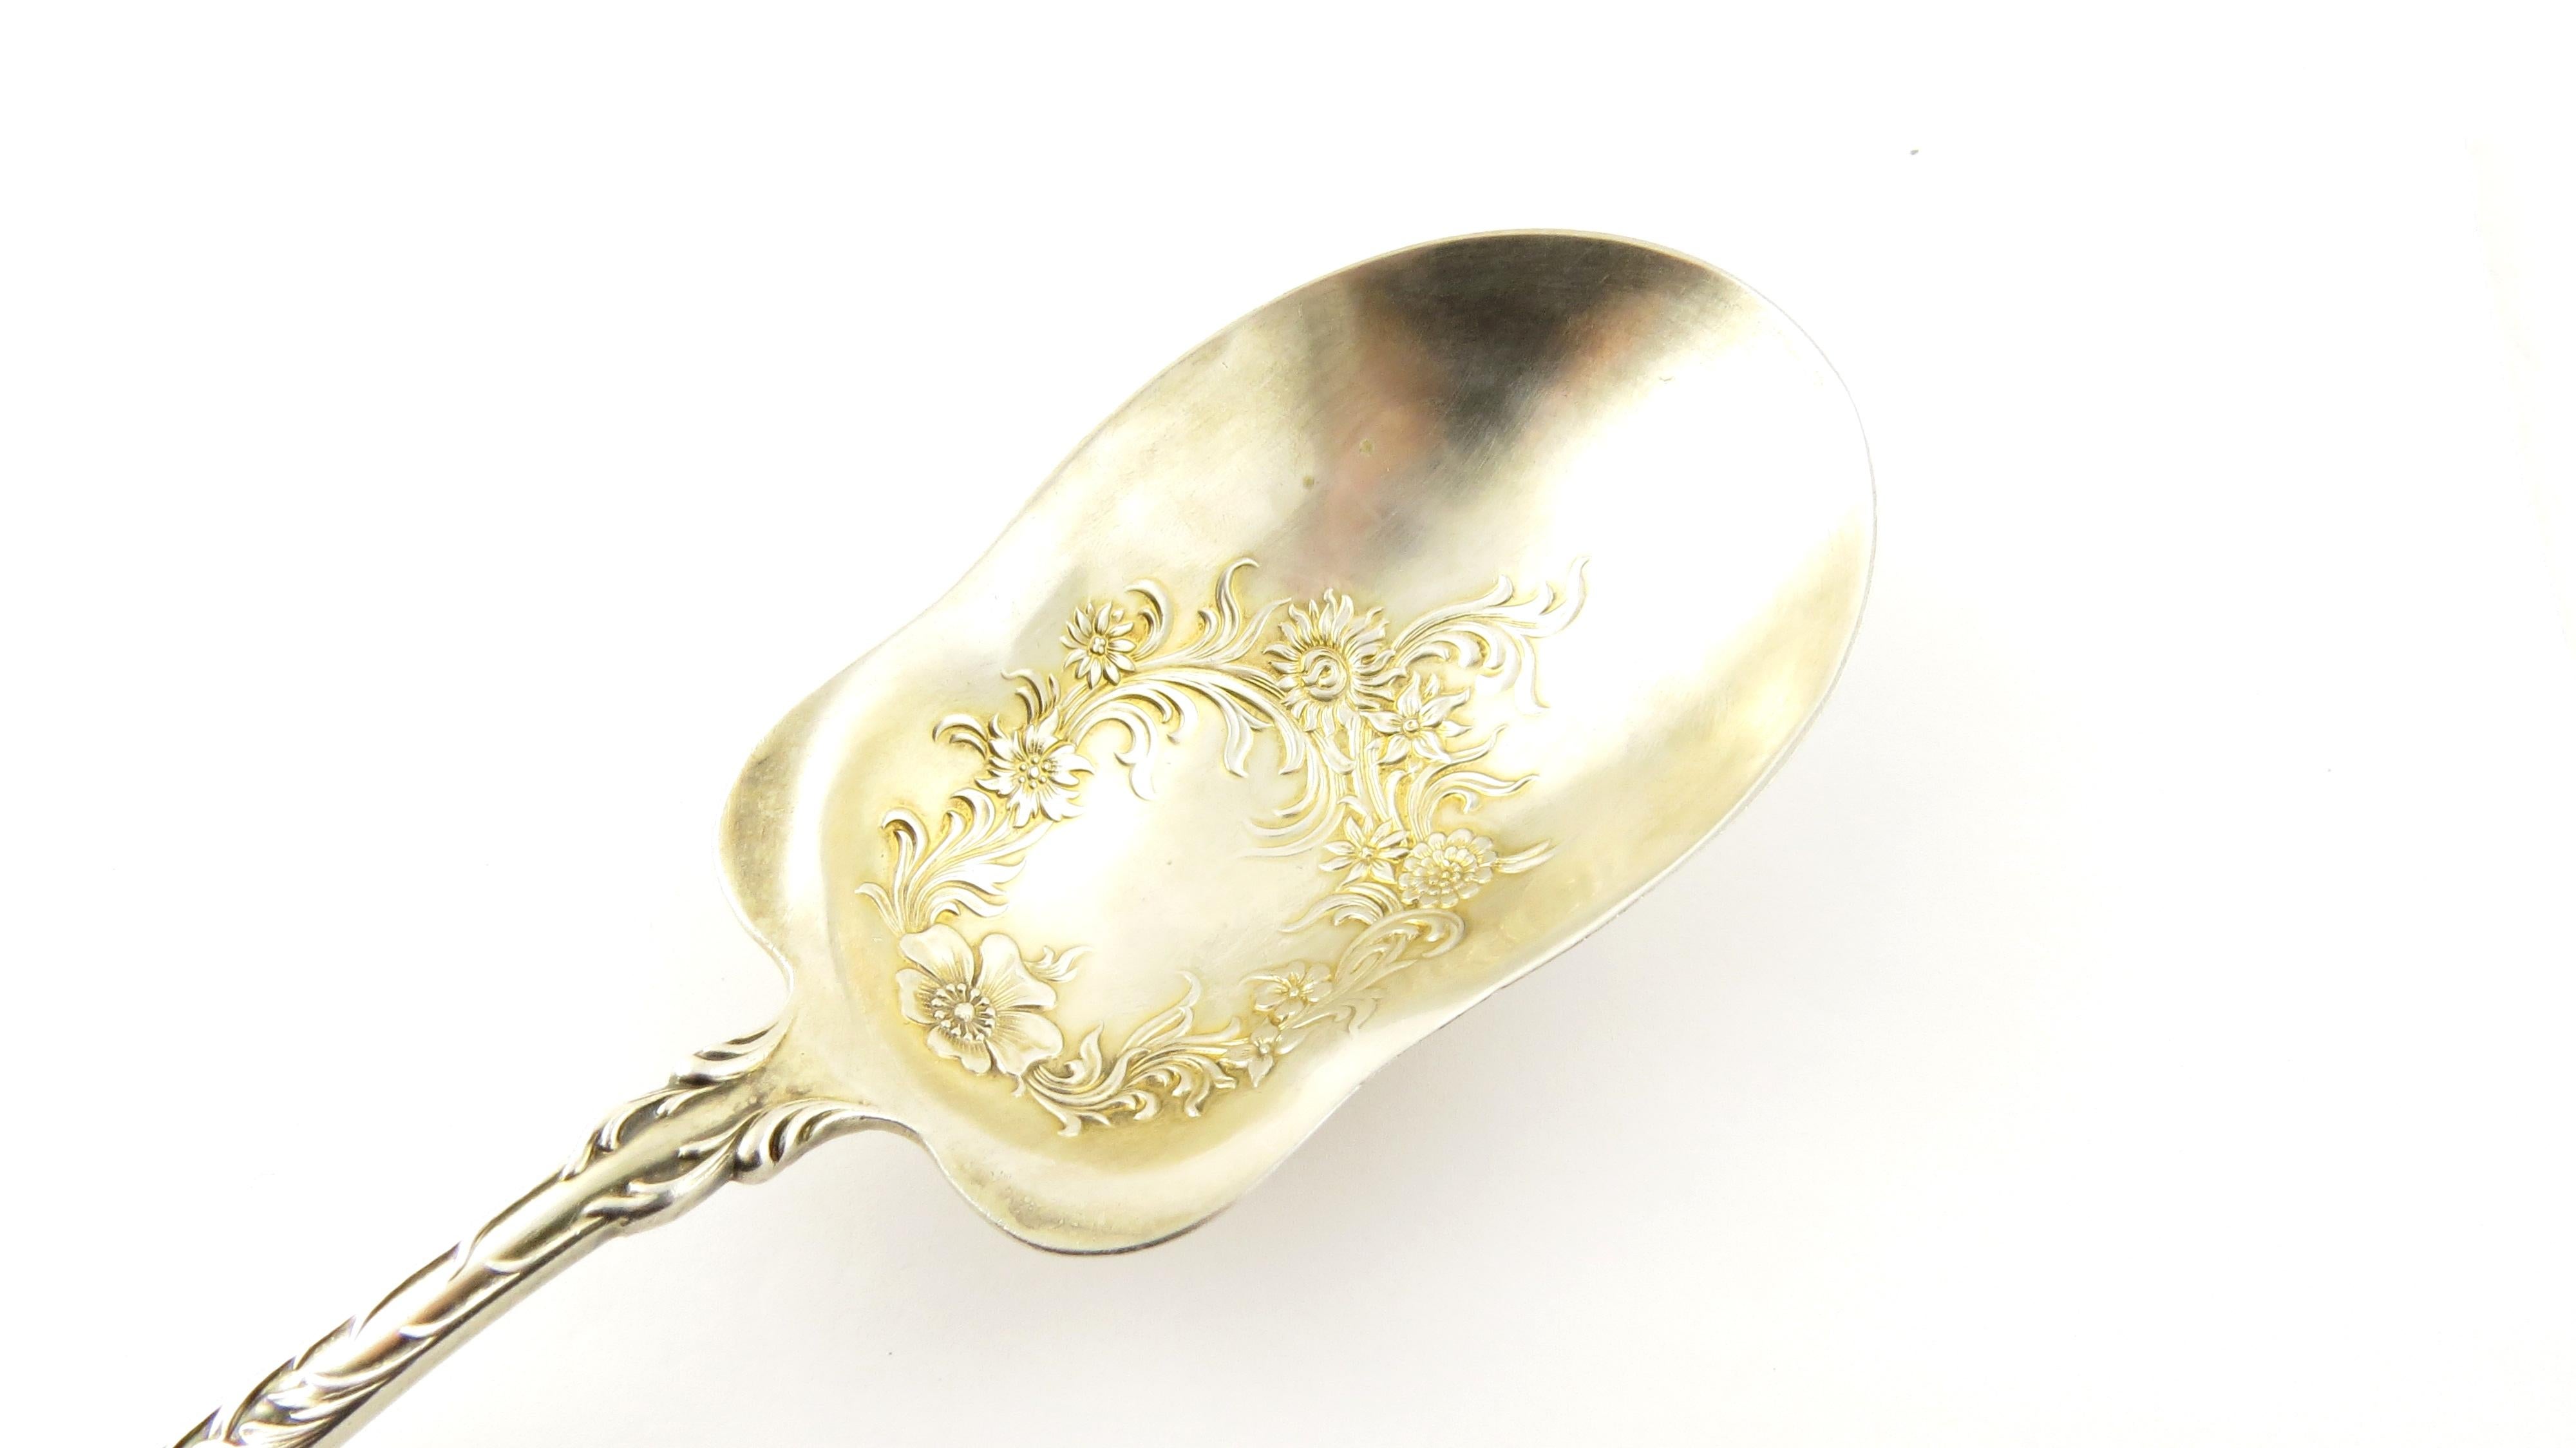 American Dominick & Haff No.10 Sterling Silver Enameled Gilt Small Berry Spoon For Sale